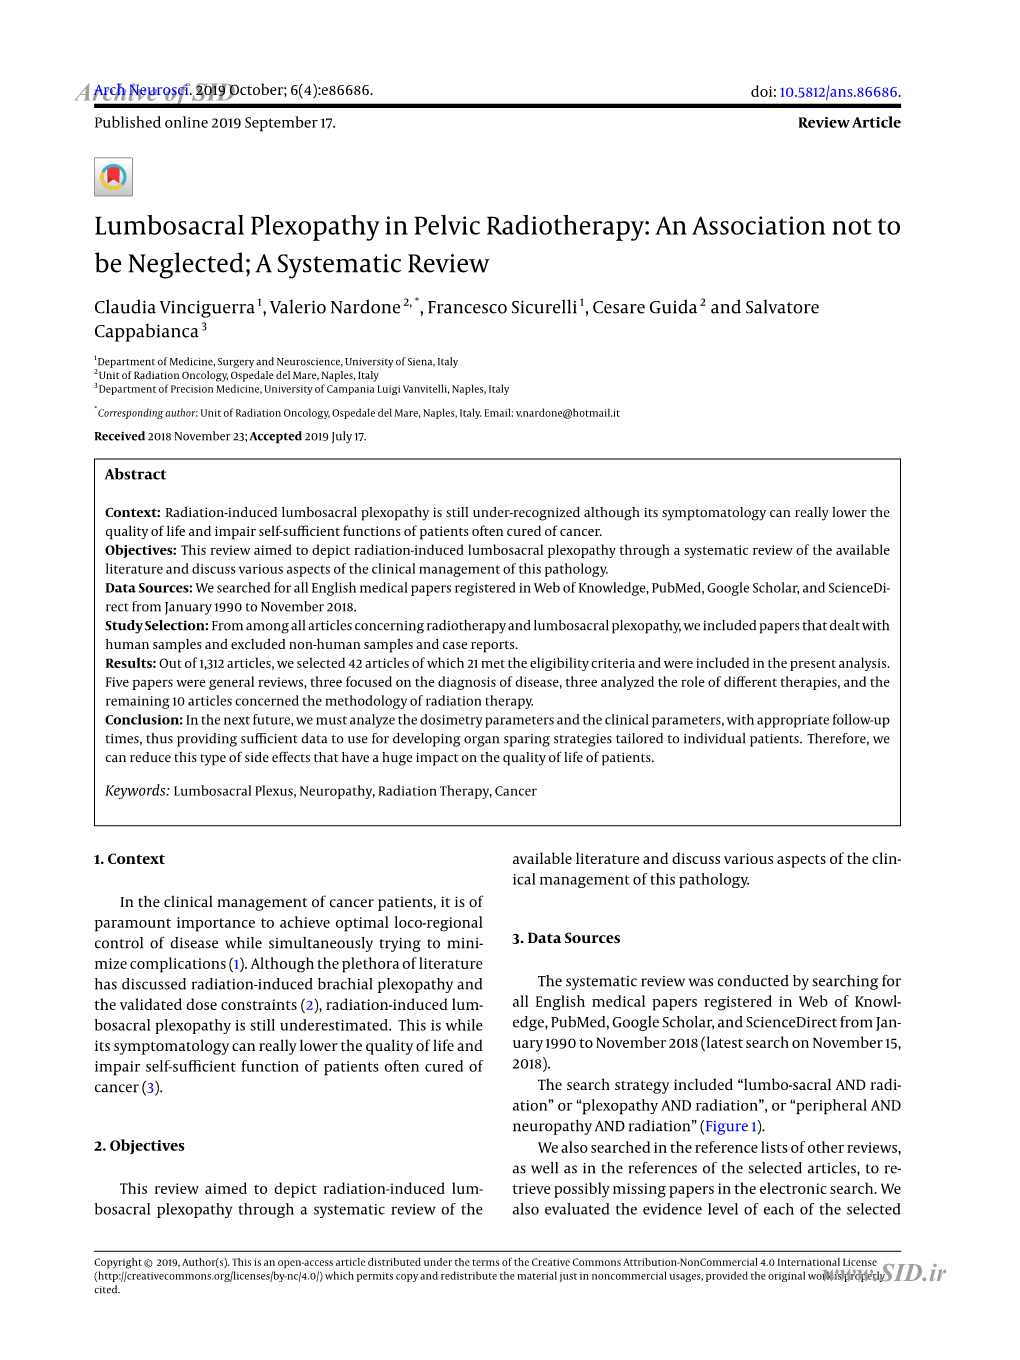 Lumbosacral Plexopathy in Pelvic Radiotherapy: an Association Not to Be Neglected; a Systematic Review